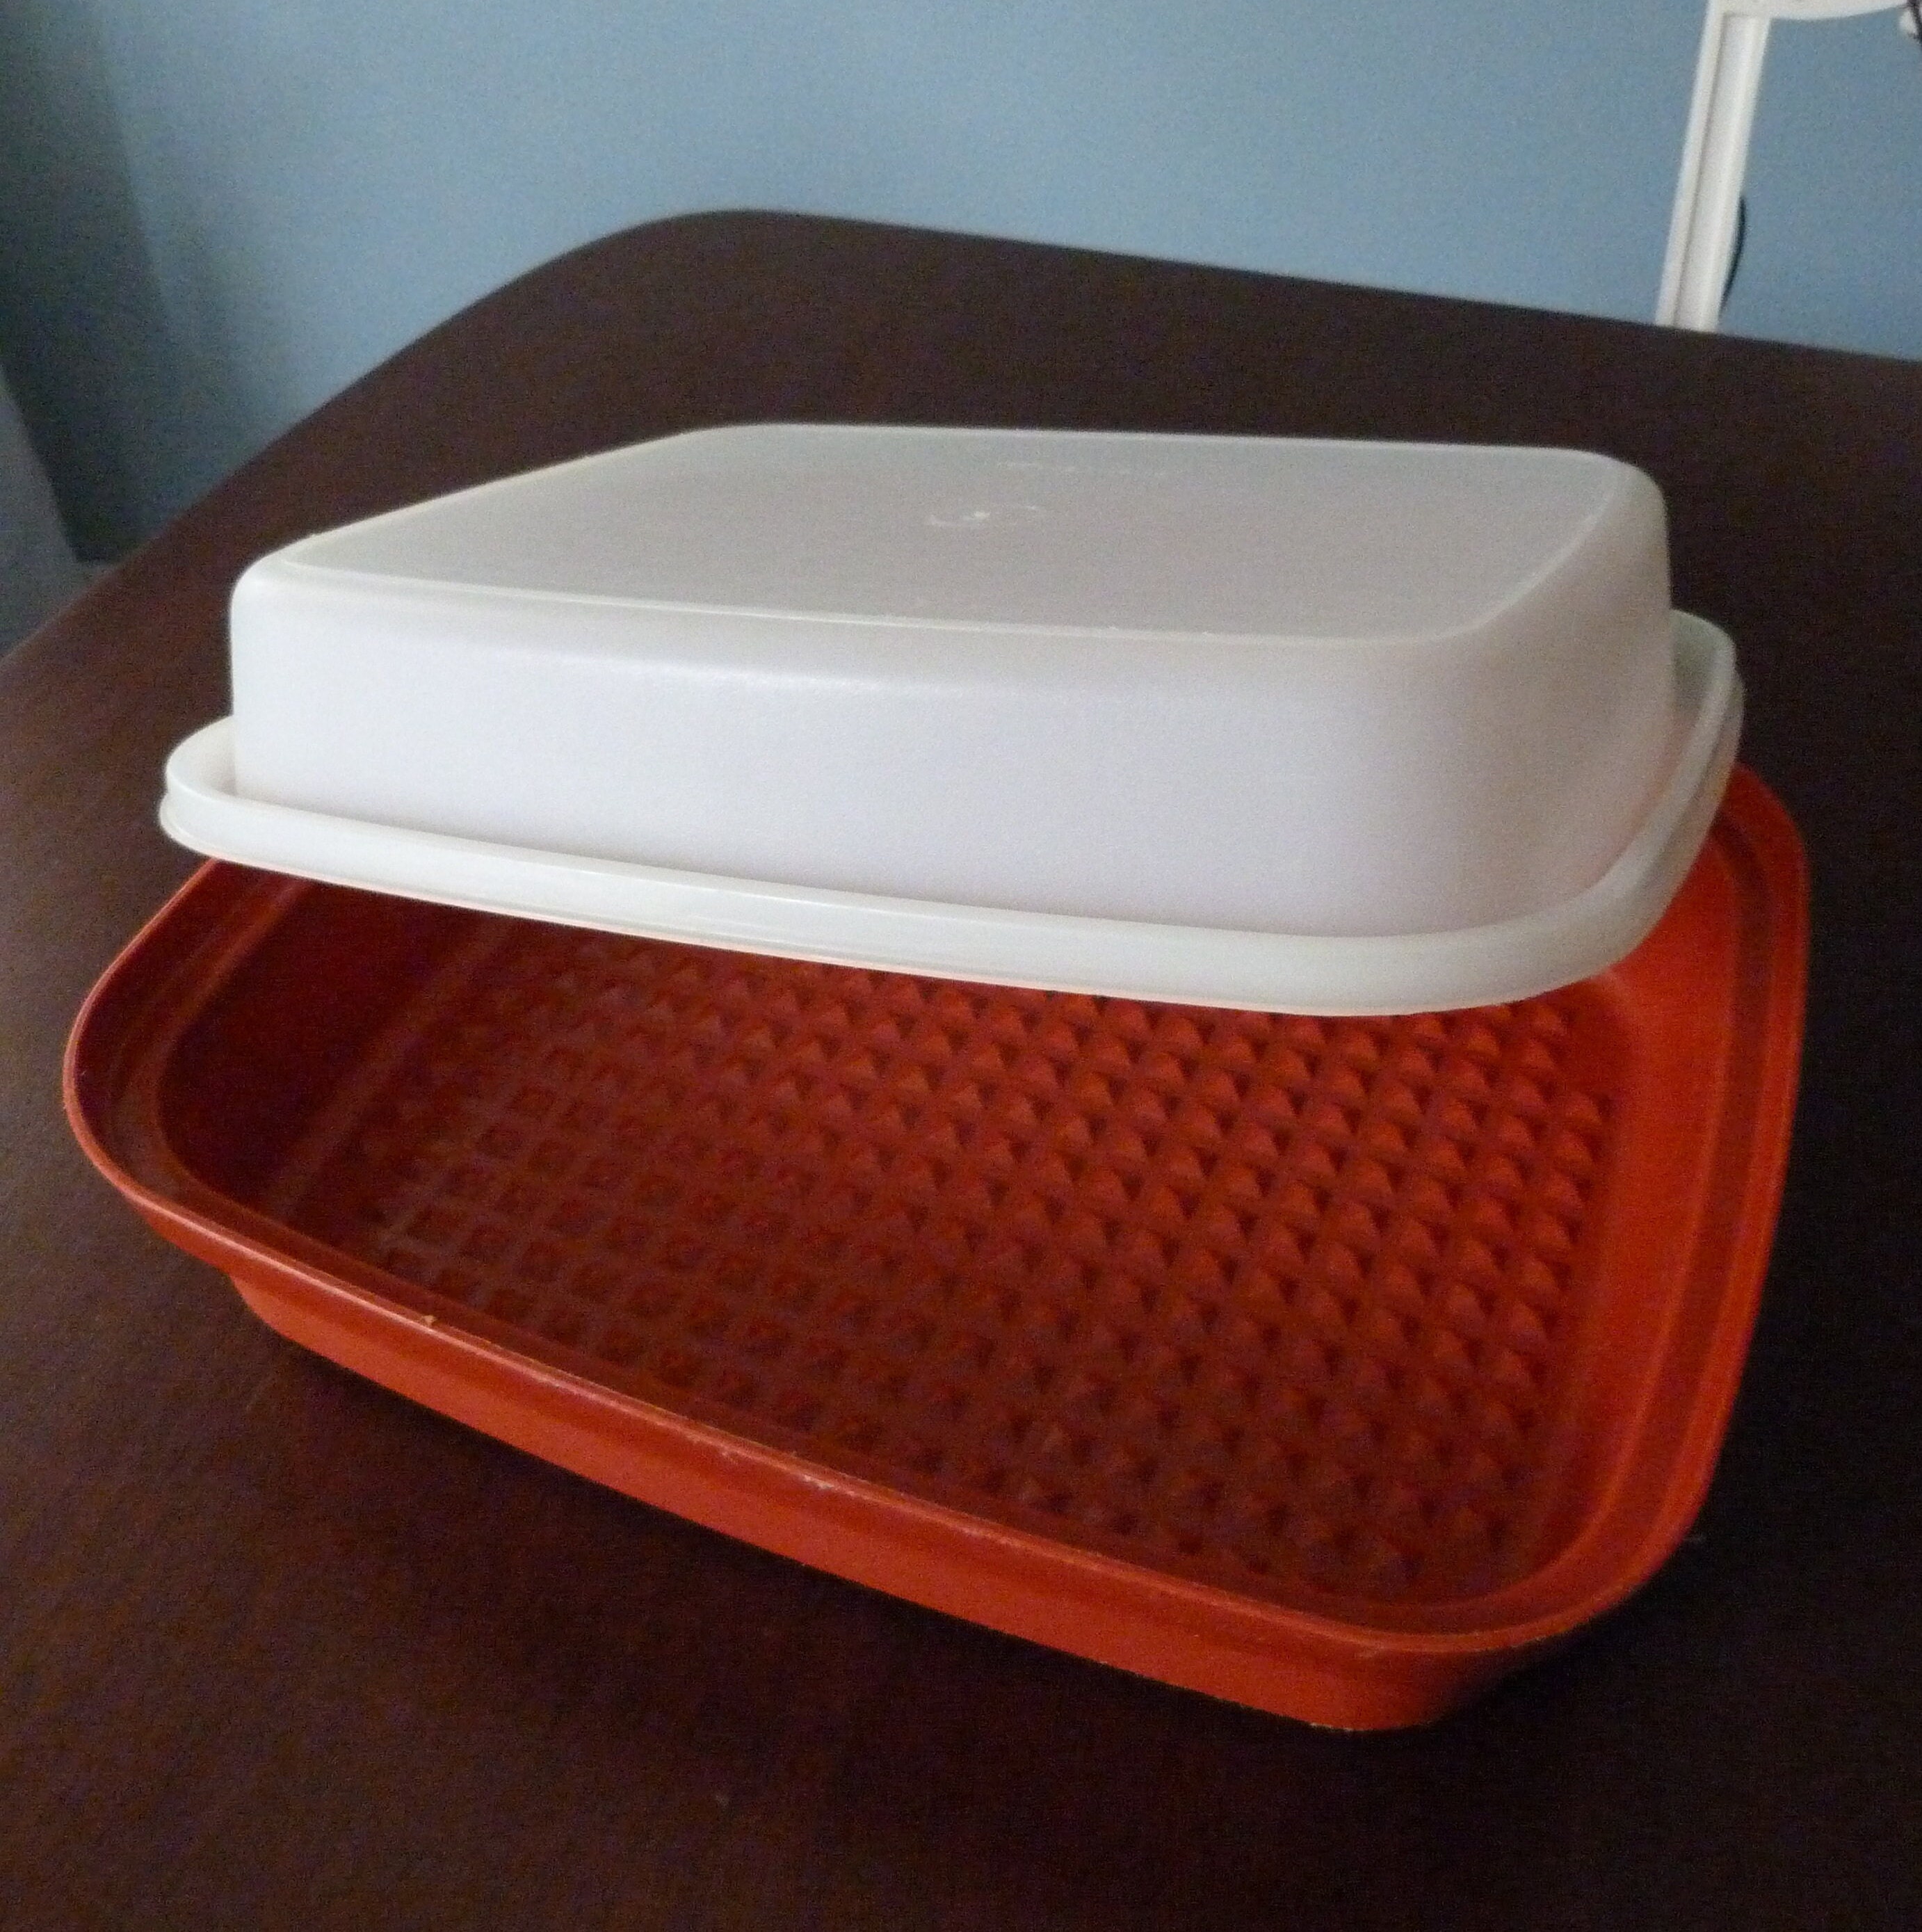 Tupperware Large Season Serve Meat Marinade Container With Lid, Paprika  Color, 10Diam x 12W Very Good Condition, #1294-7 Auction